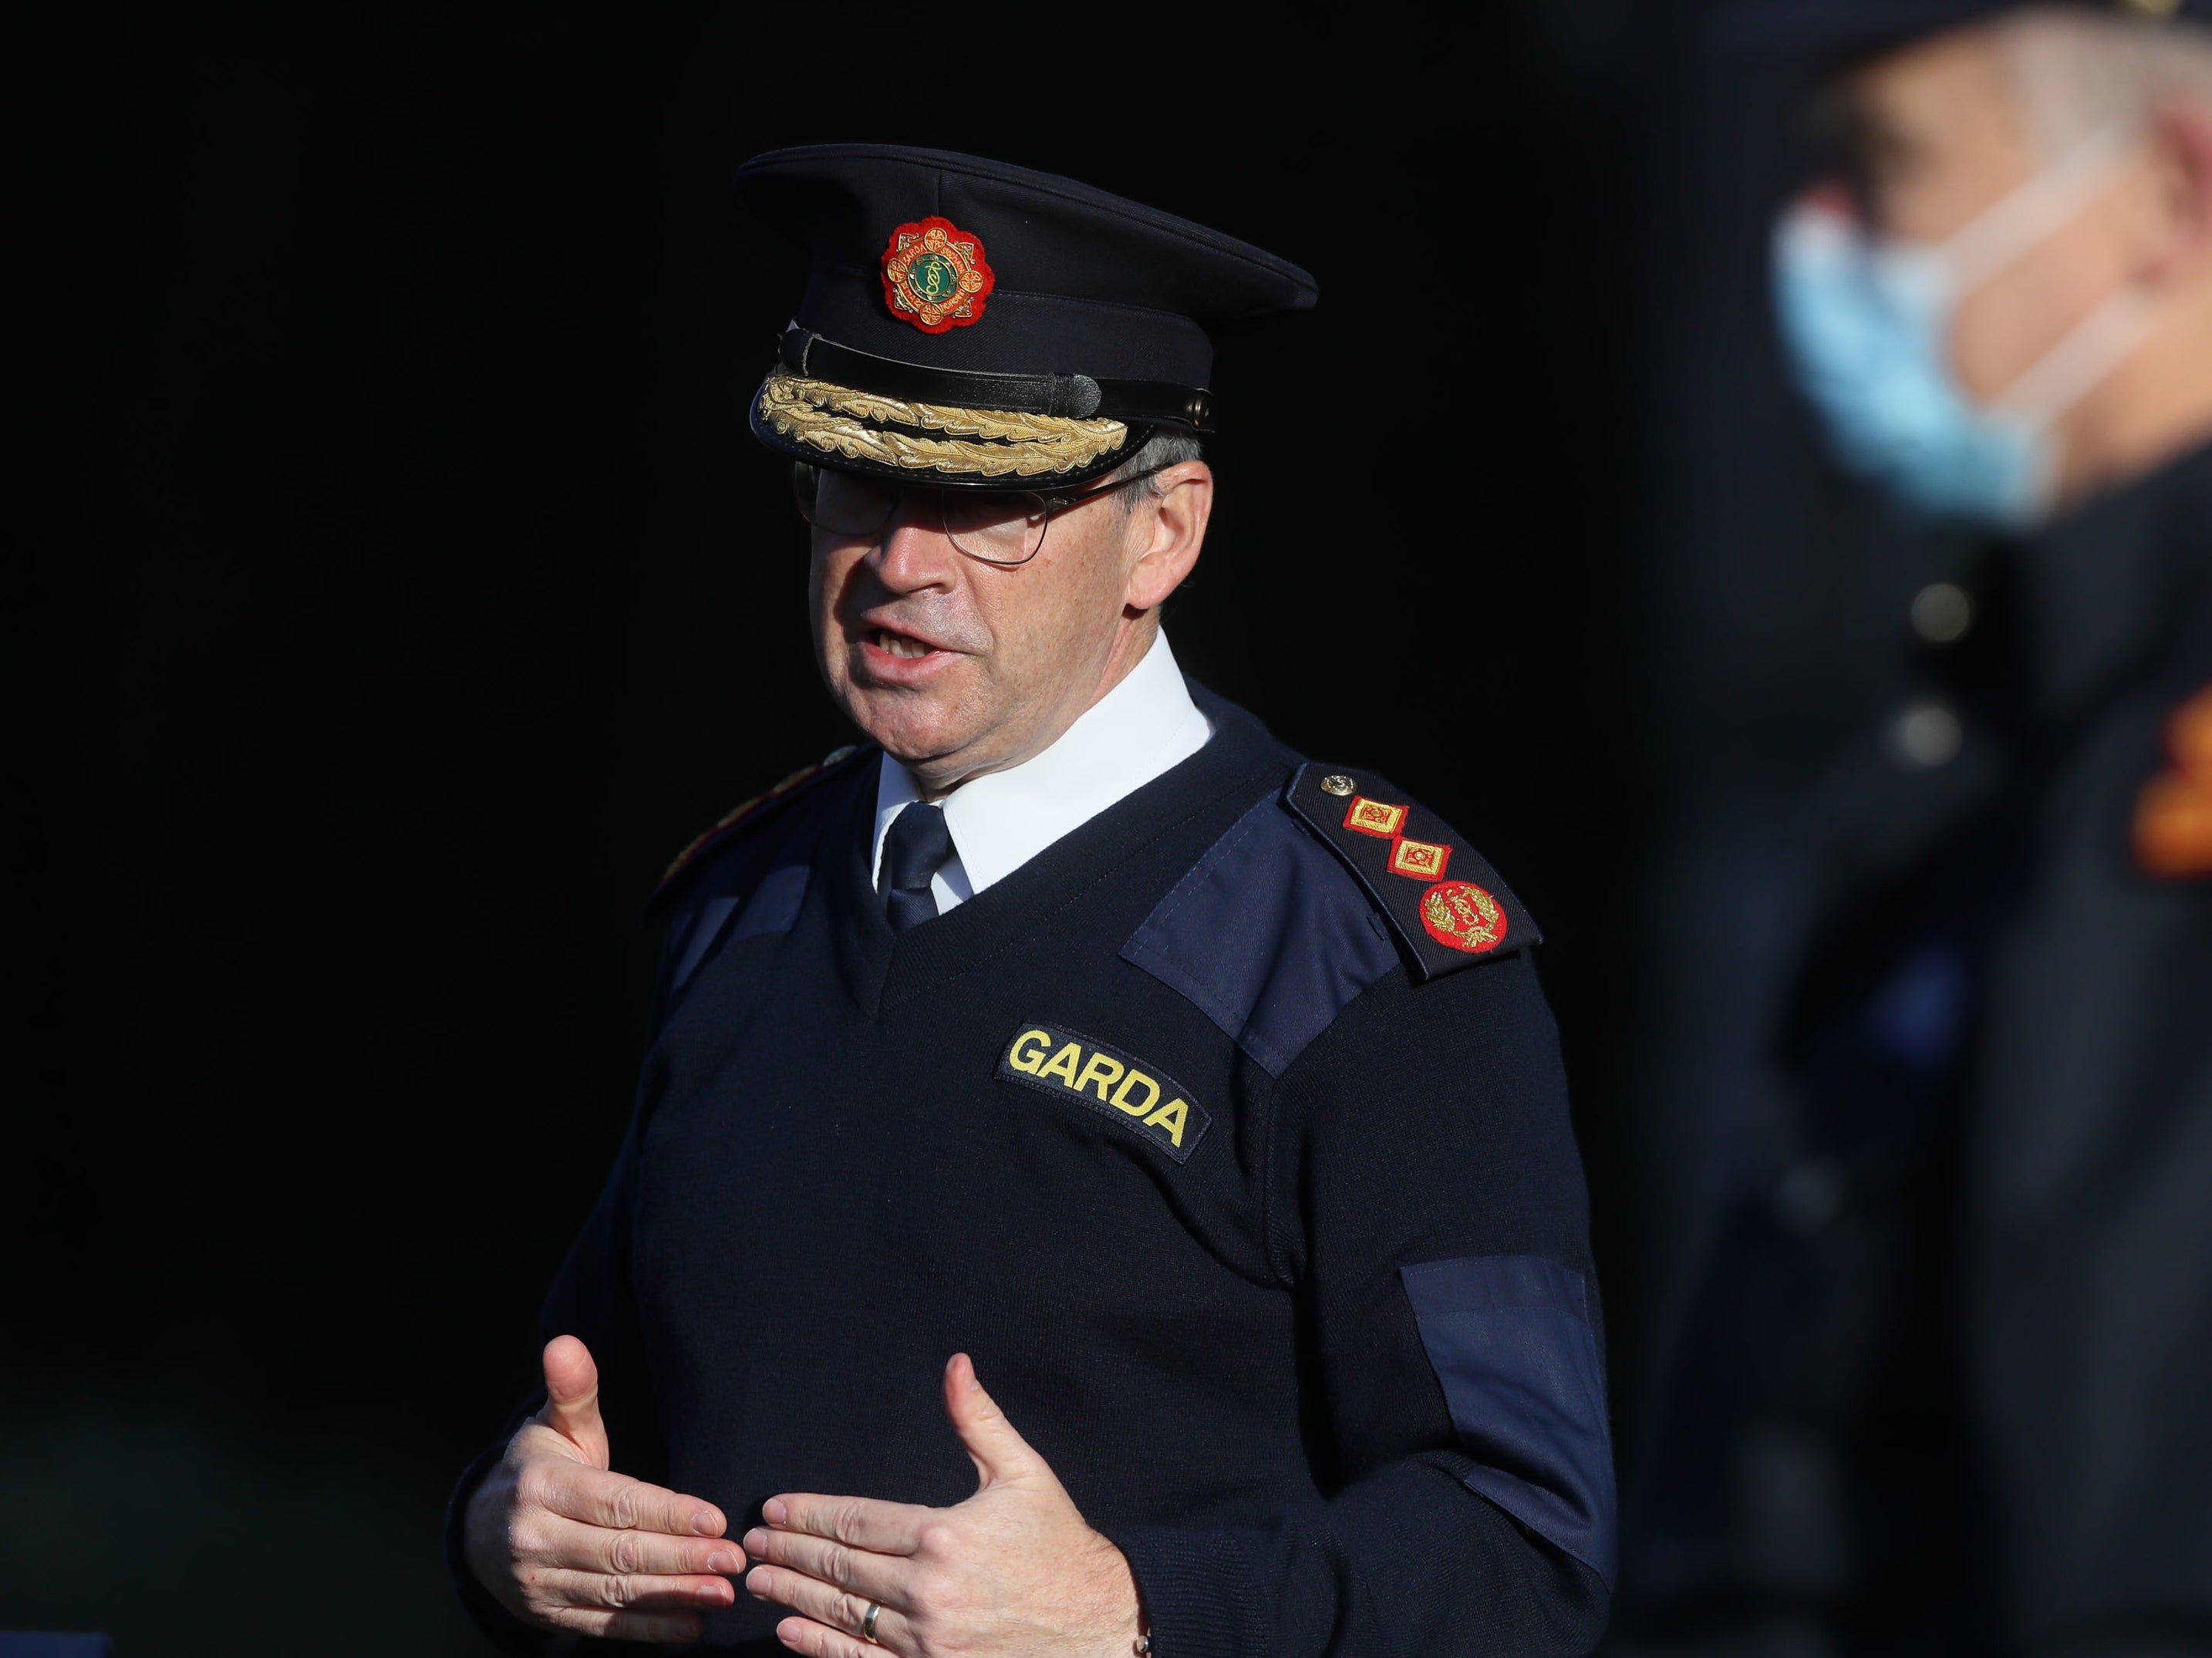 Ireland’s police commissioner, Drew Harris, has apologised to victims of domestic abuse